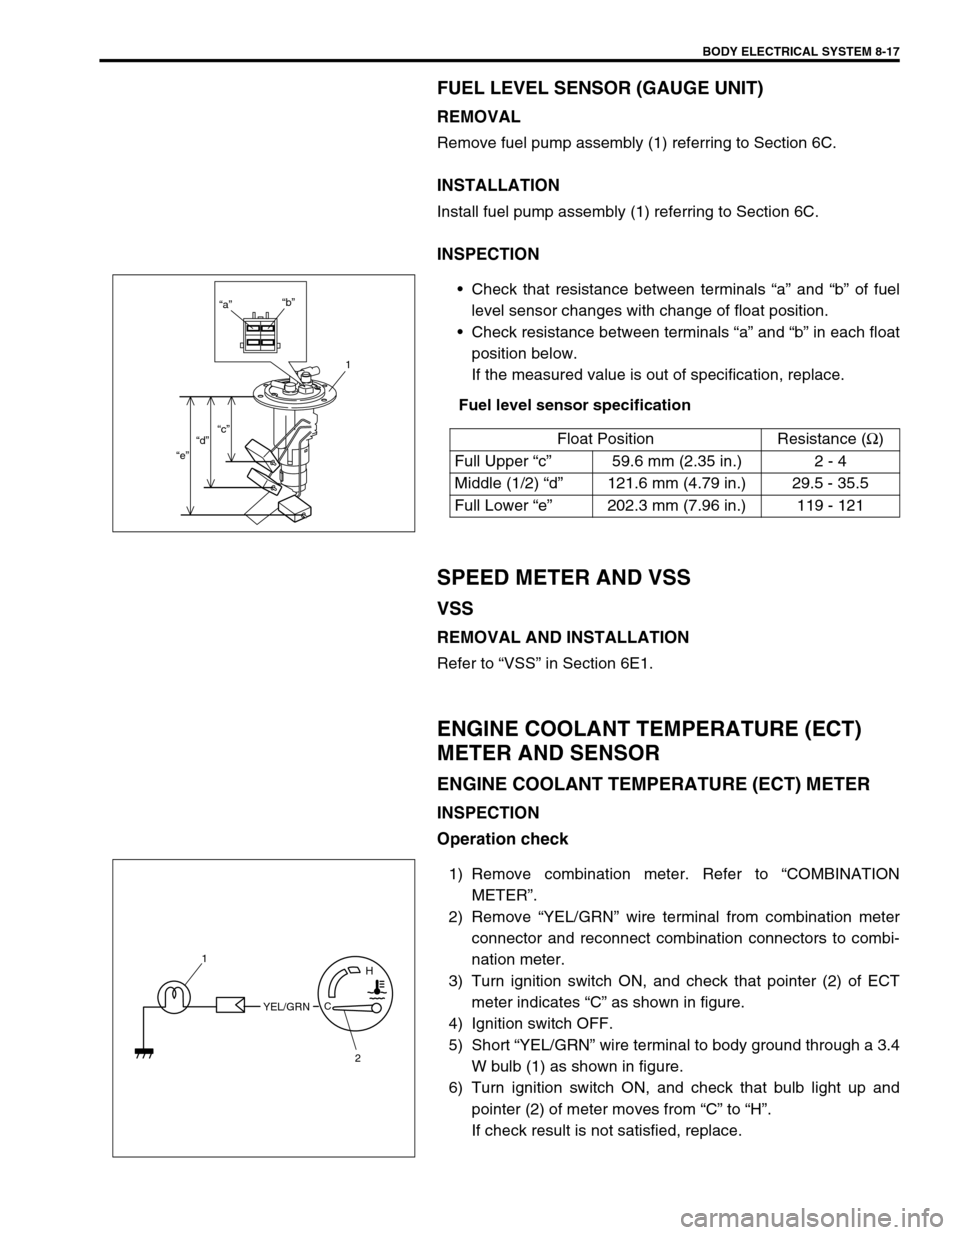 SUZUKI SWIFT 2000 1.G Transmission Service Service Manual BODY ELECTRICAL SYSTEM 8-17
FUEL LEVEL SENSOR (GAUGE UNIT)
REMOVAL
Remove fuel pump assembly (1) referring to Section 6C.
INSTALLATION
Install fuel pump assembly (1) referring to Section 6C.
INSPECTIO